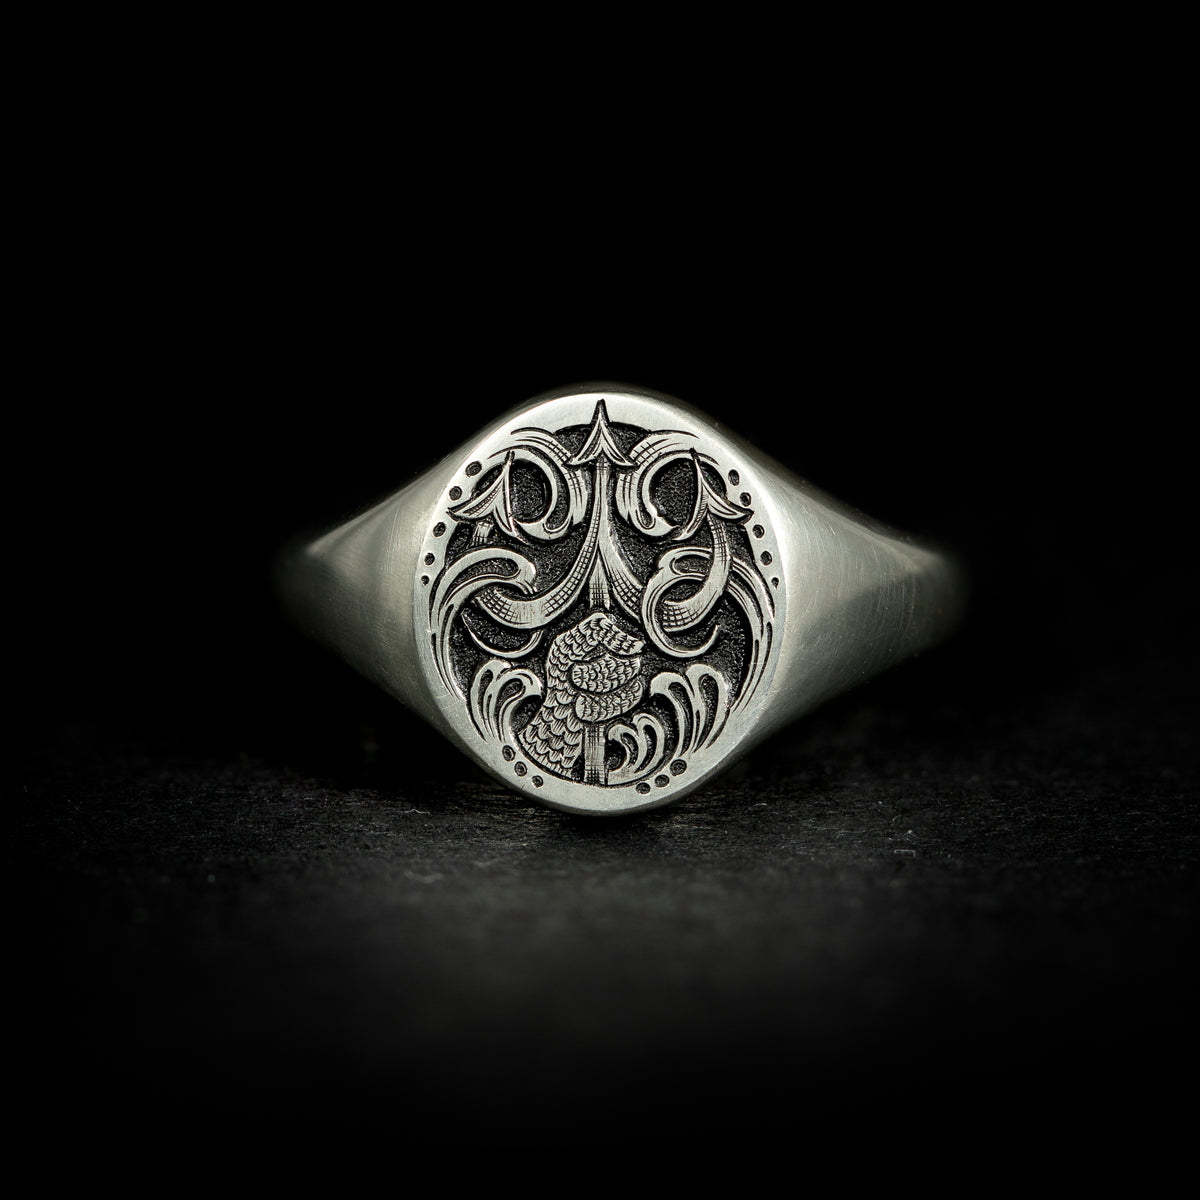 Silver oval jewellery signet ring hand engraved with fantasy scene of Poseidon thrusting his trident from the water. On black background face on.